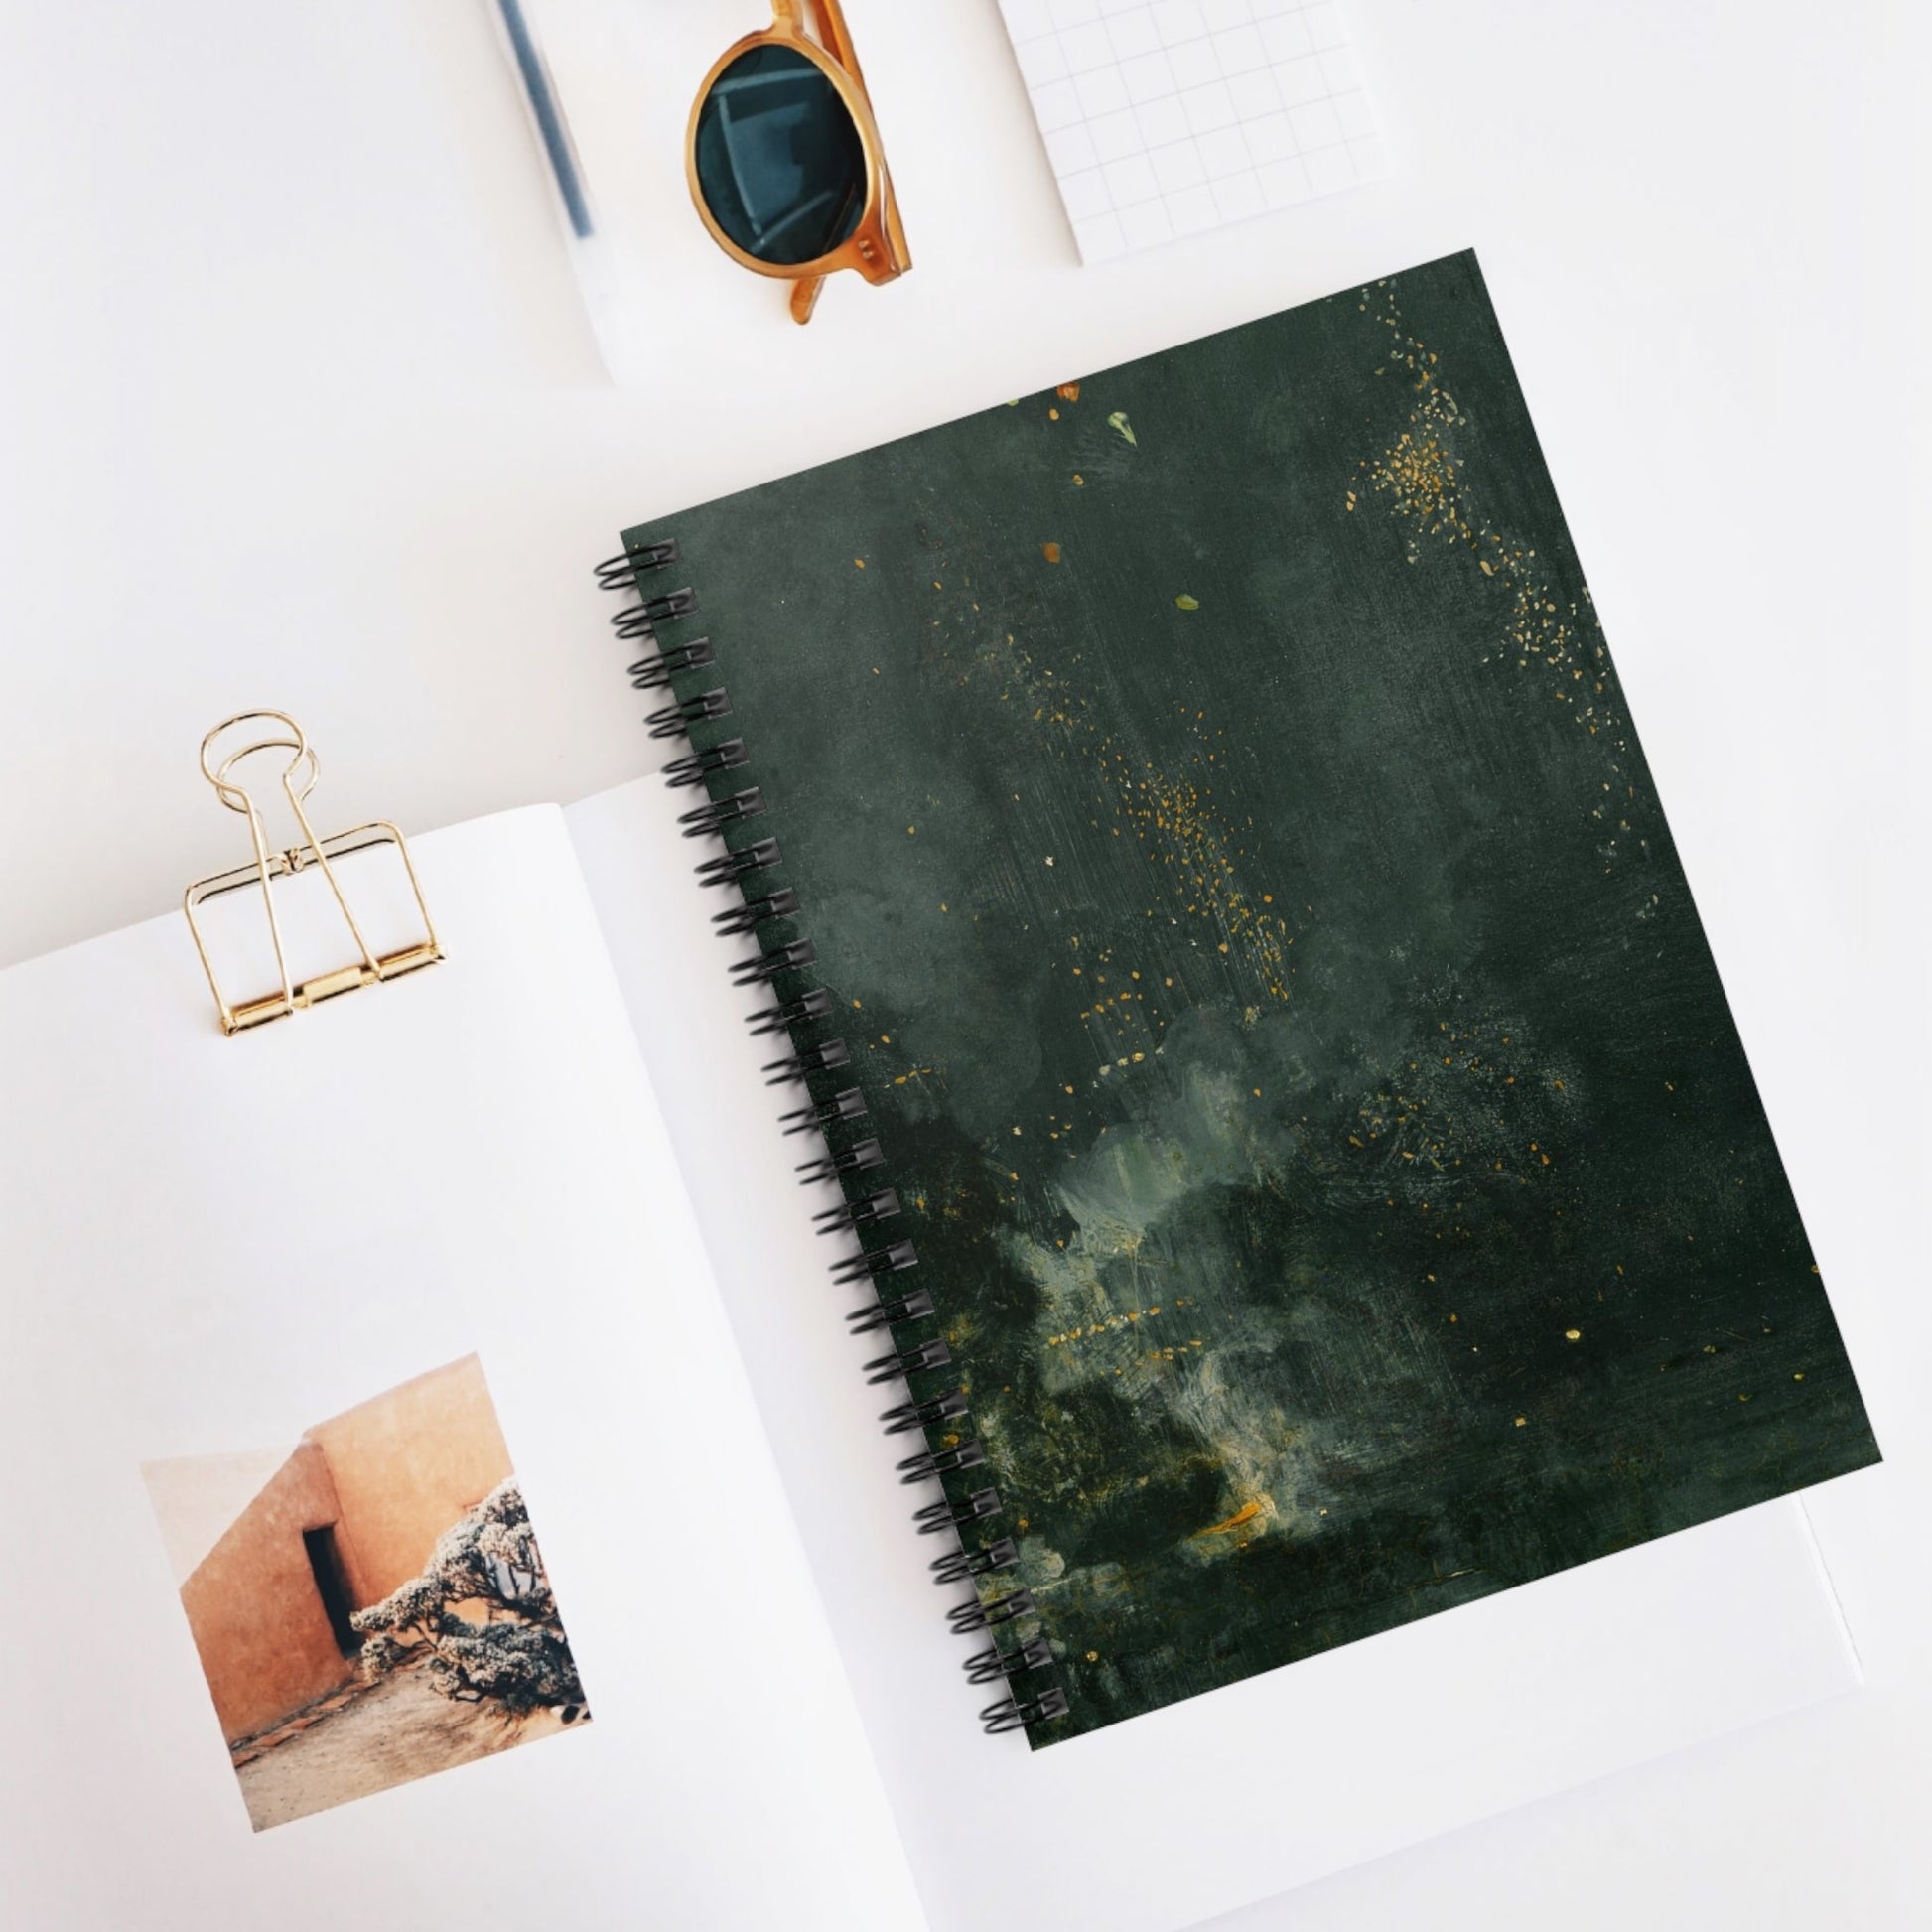 Abstract Spiral Notebook Displayed on Desk